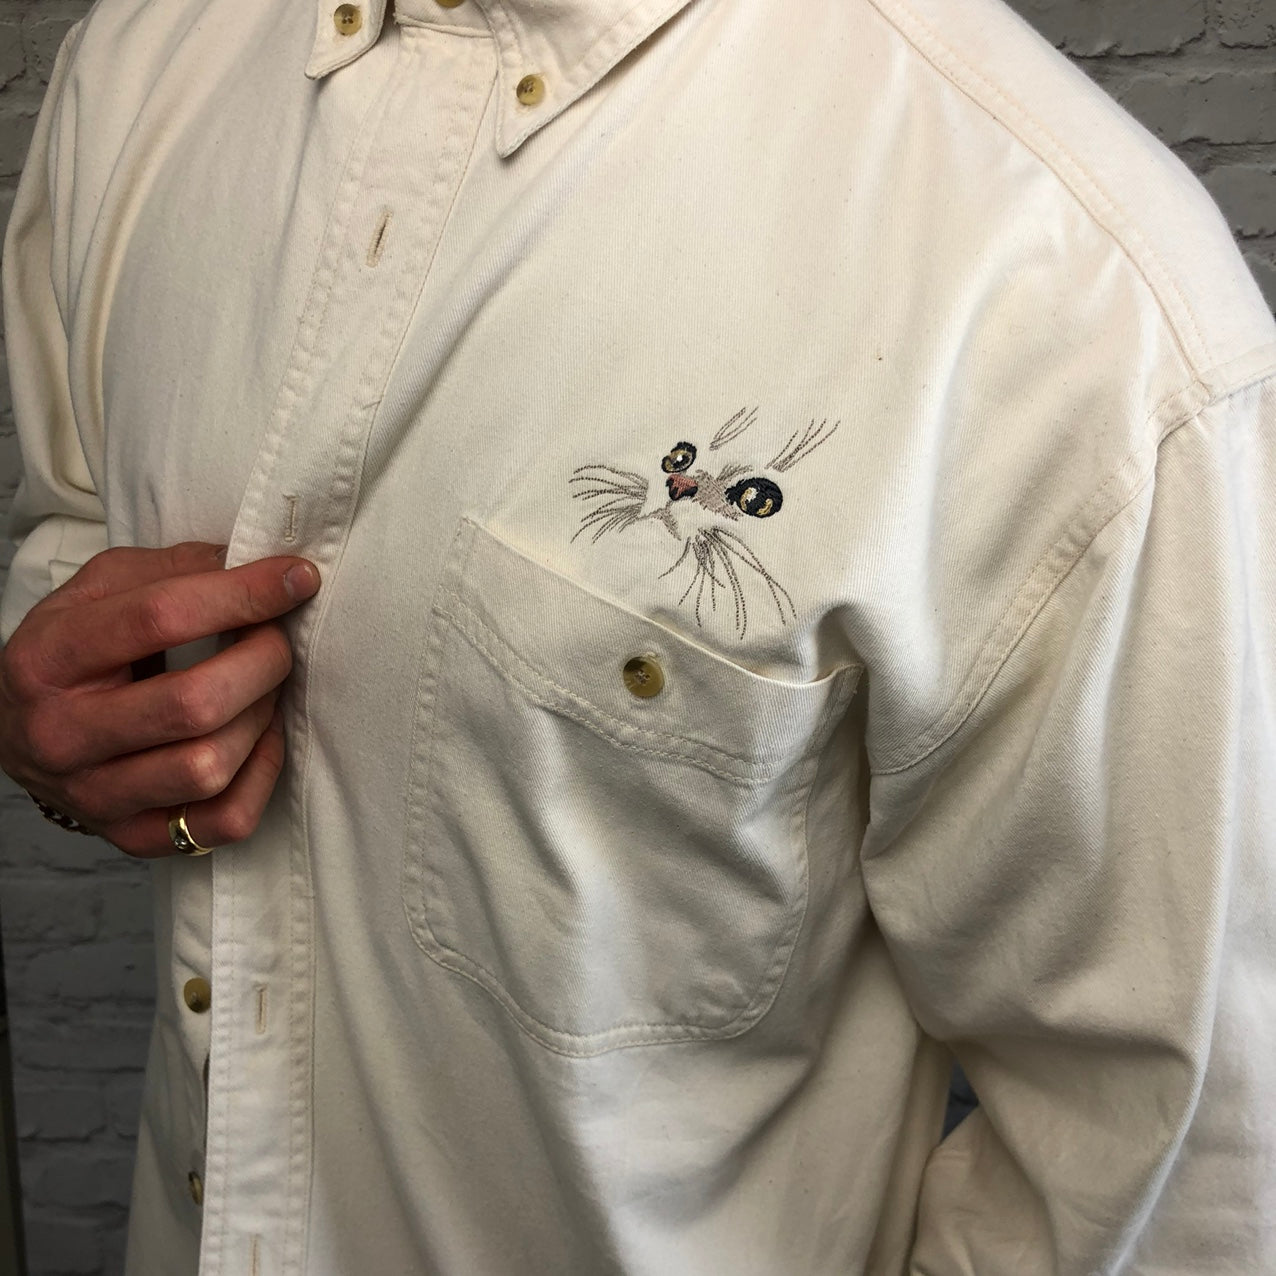 Men’s Vintage Lee Overshirt Casual Shirt with Unique Cat Embroidery - XL/Large